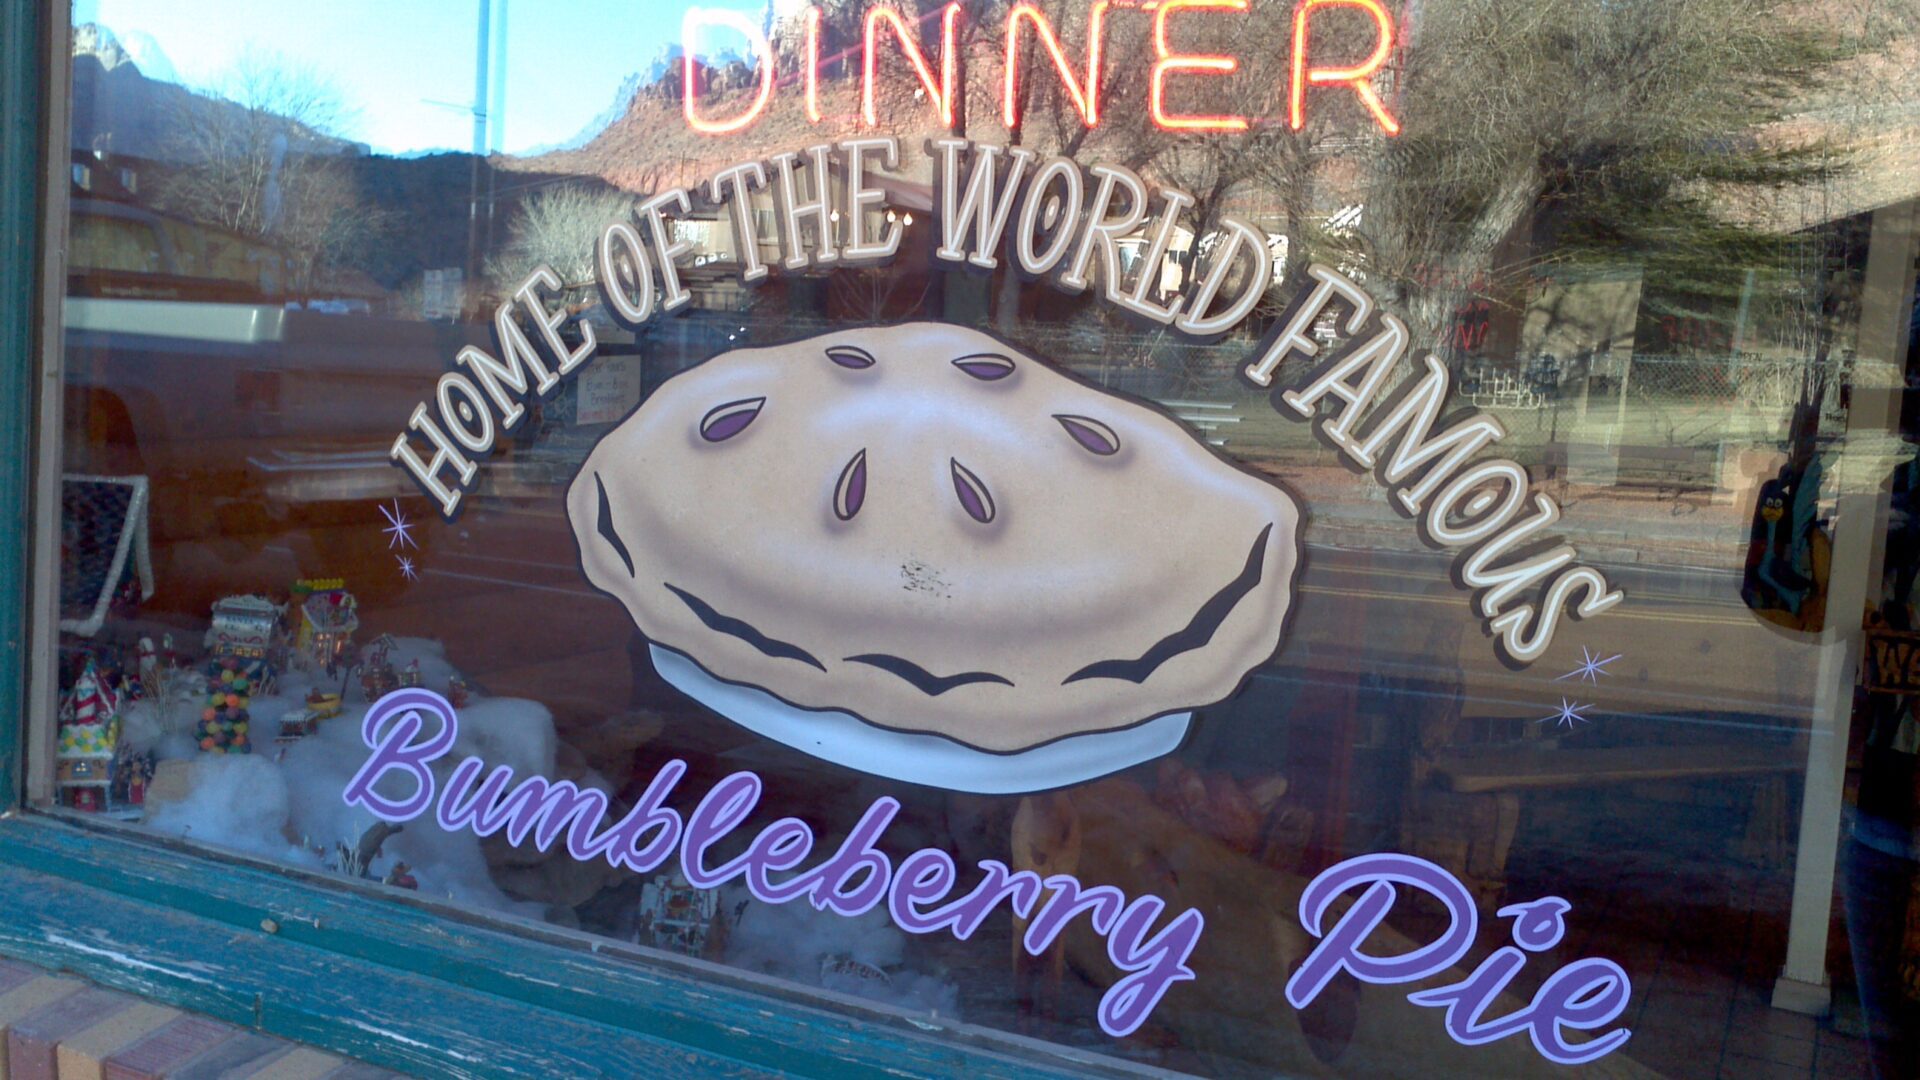 A window display of a pie.